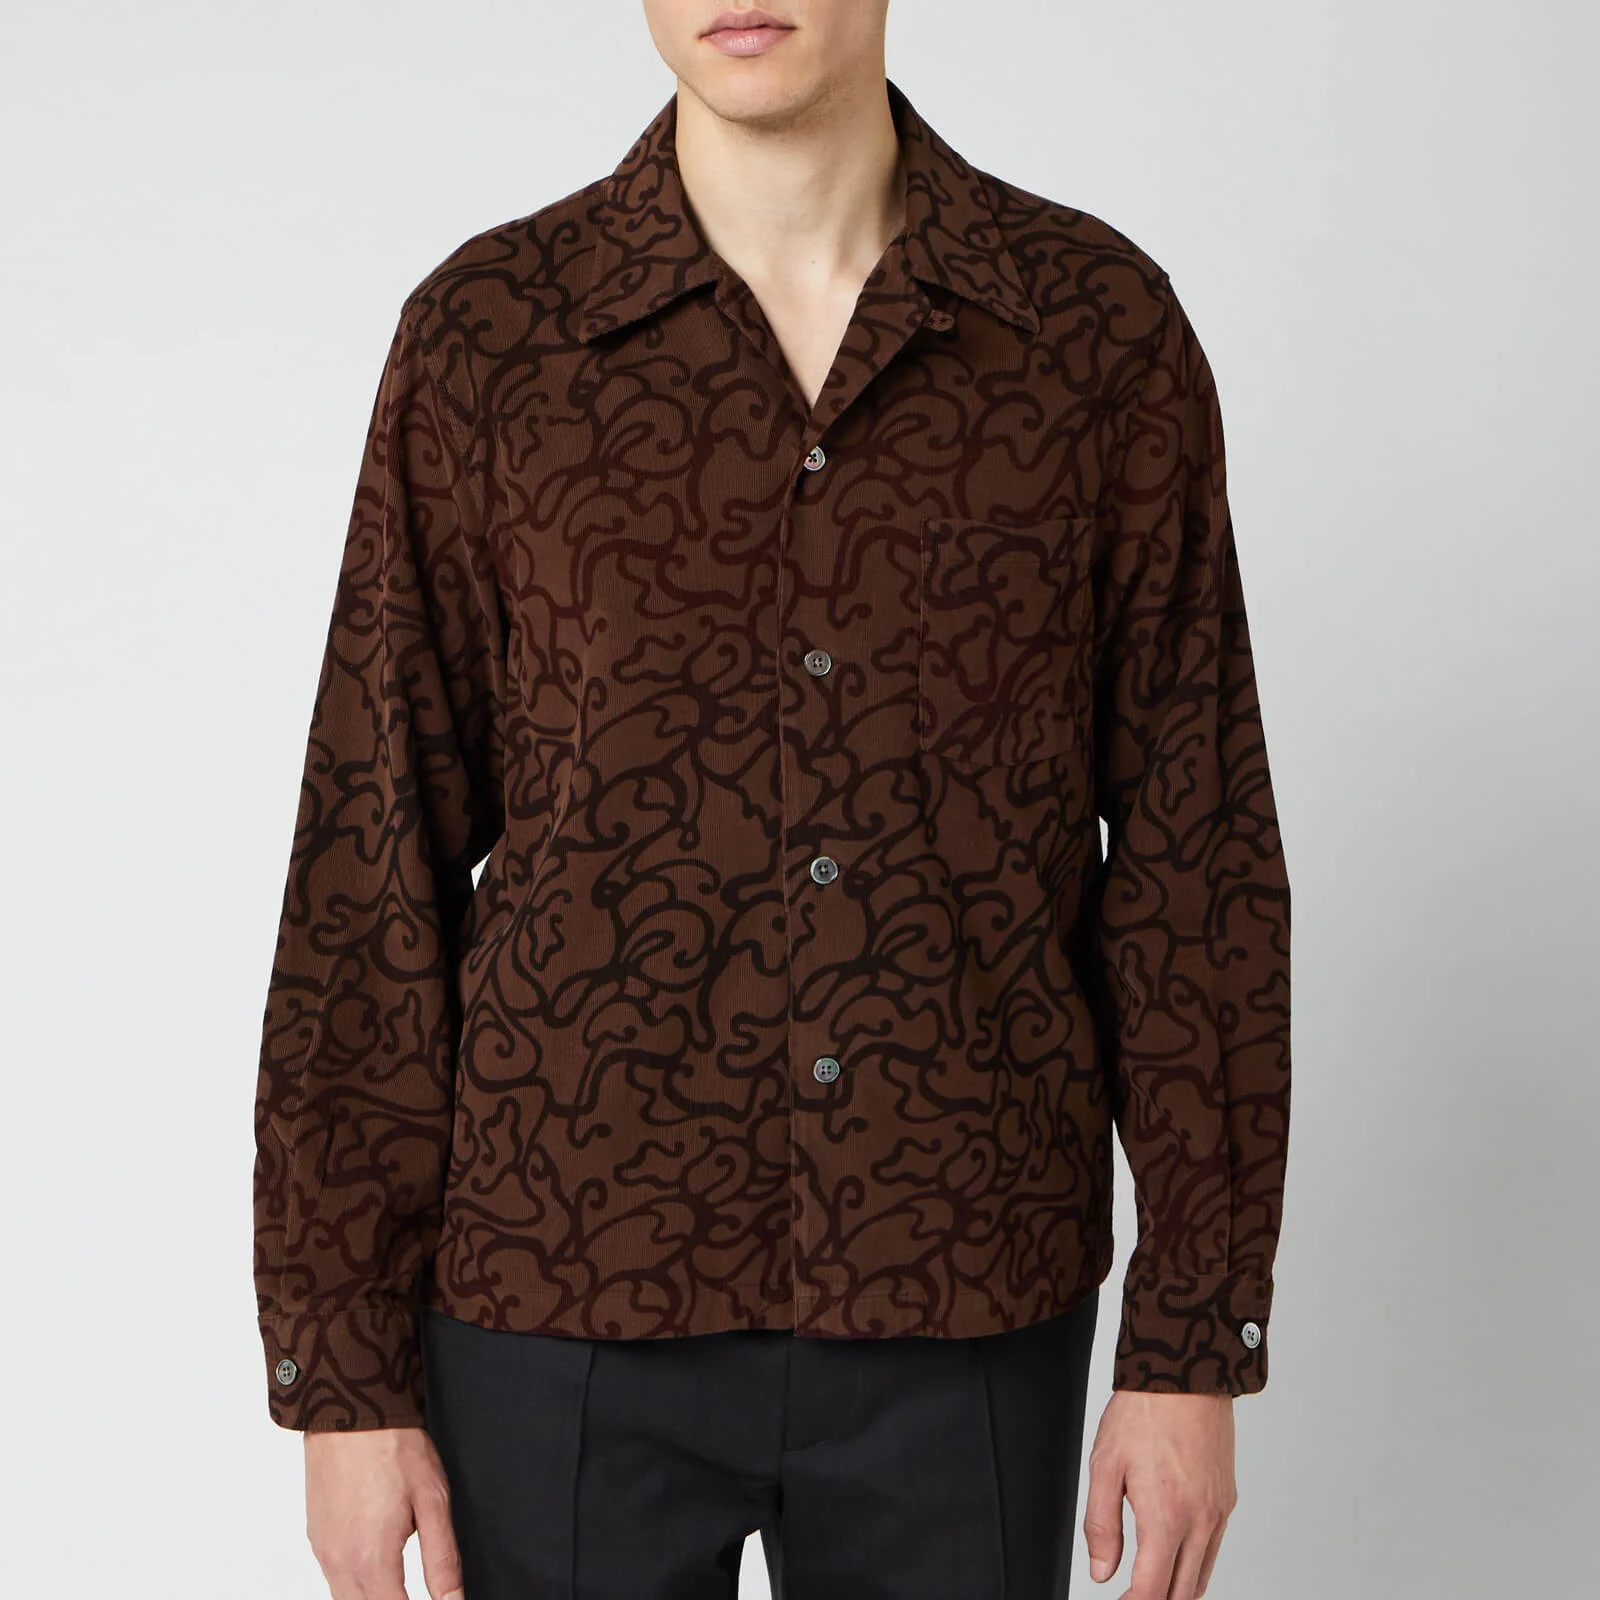 Our Legacy Men's PX Evening Shirt - Swirl Print Image 1